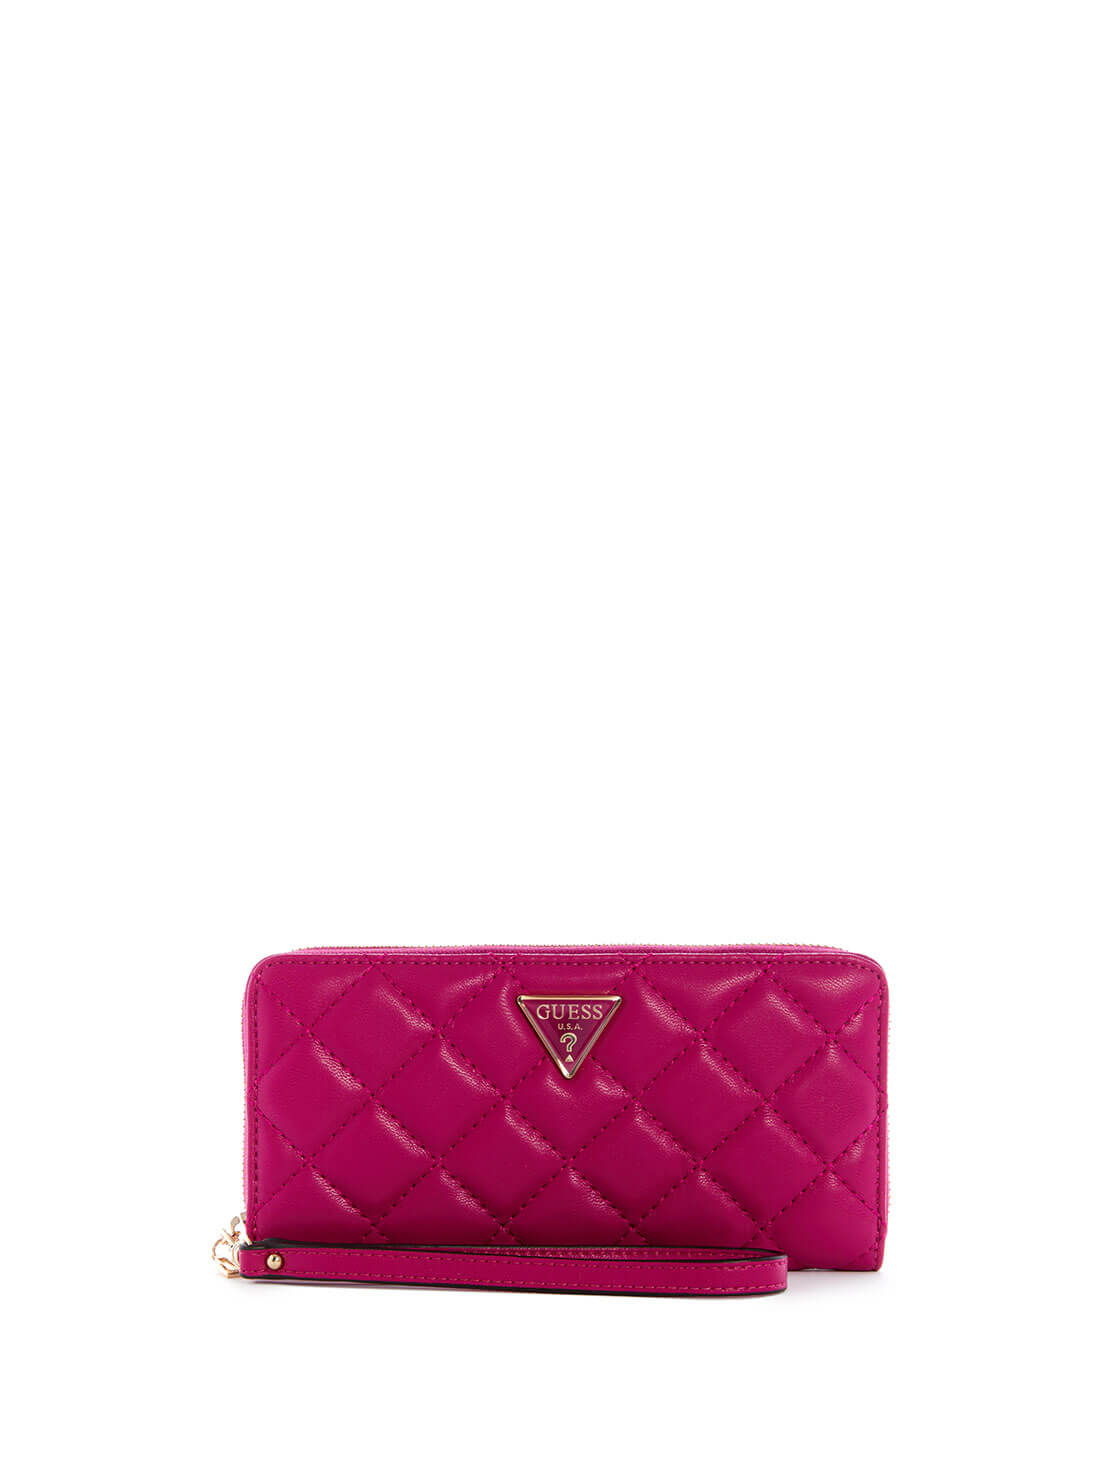 GUESS Womens Fuchsia Pink Cessily Quilted Large Wallet QG767946 Front View